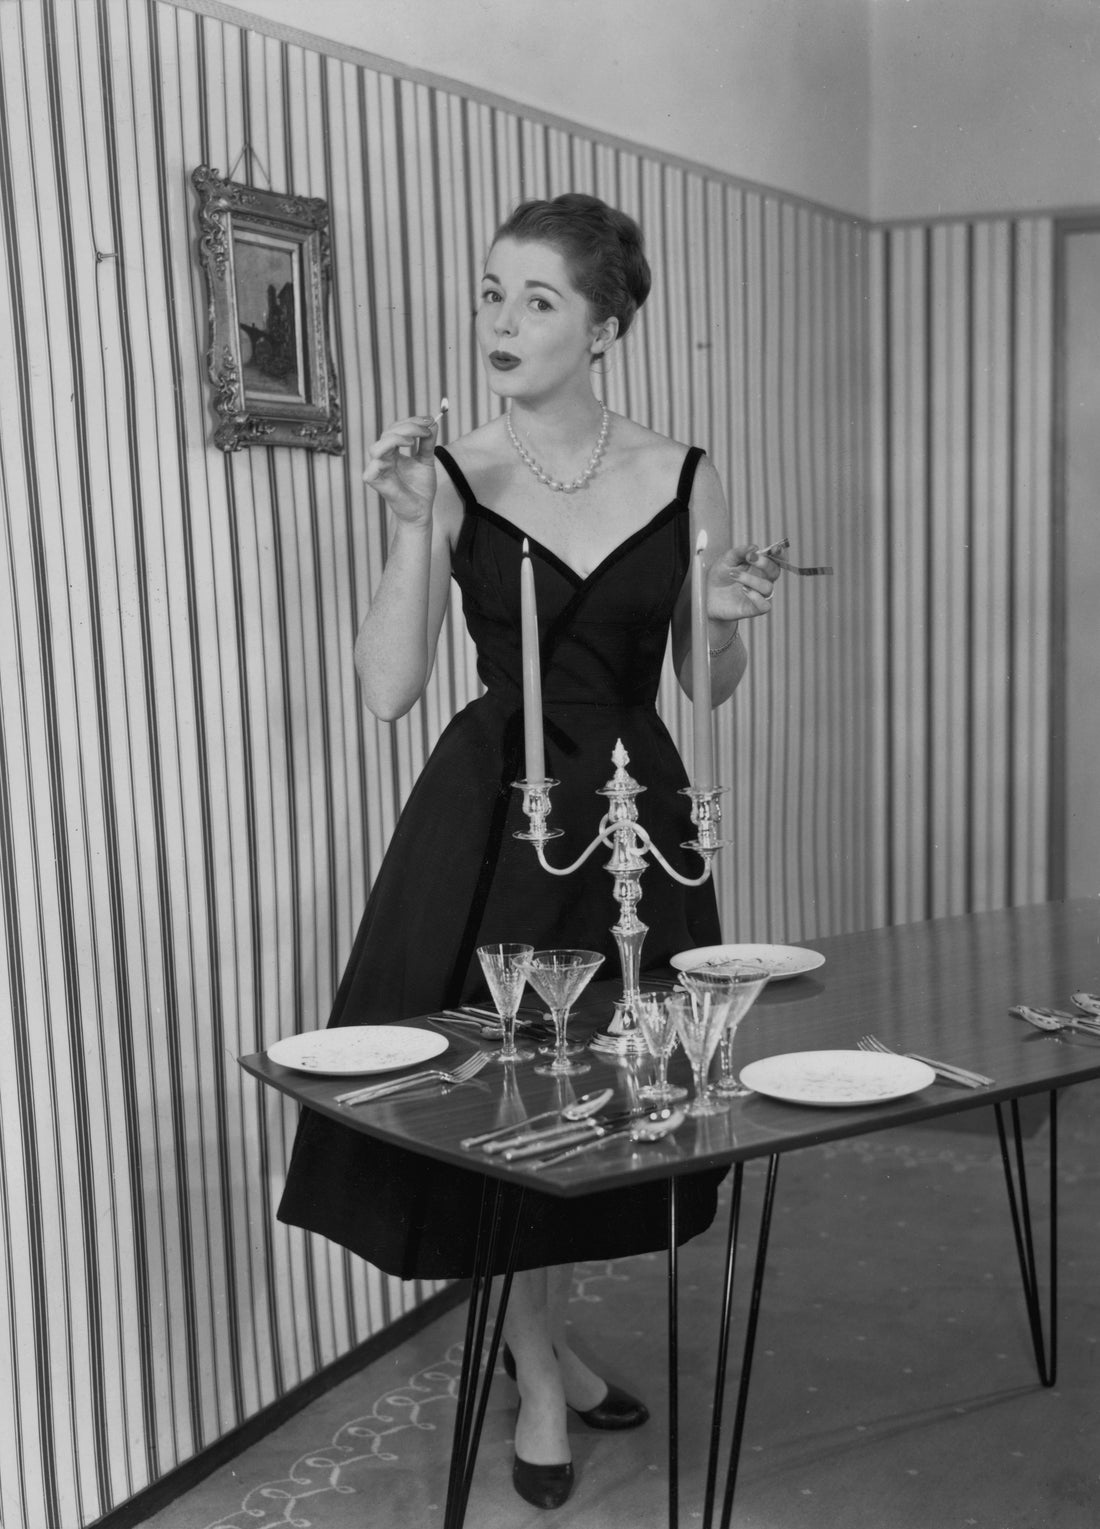 A black and white photo of a 50s housewife wearing a black evening dress preparing the dinner table